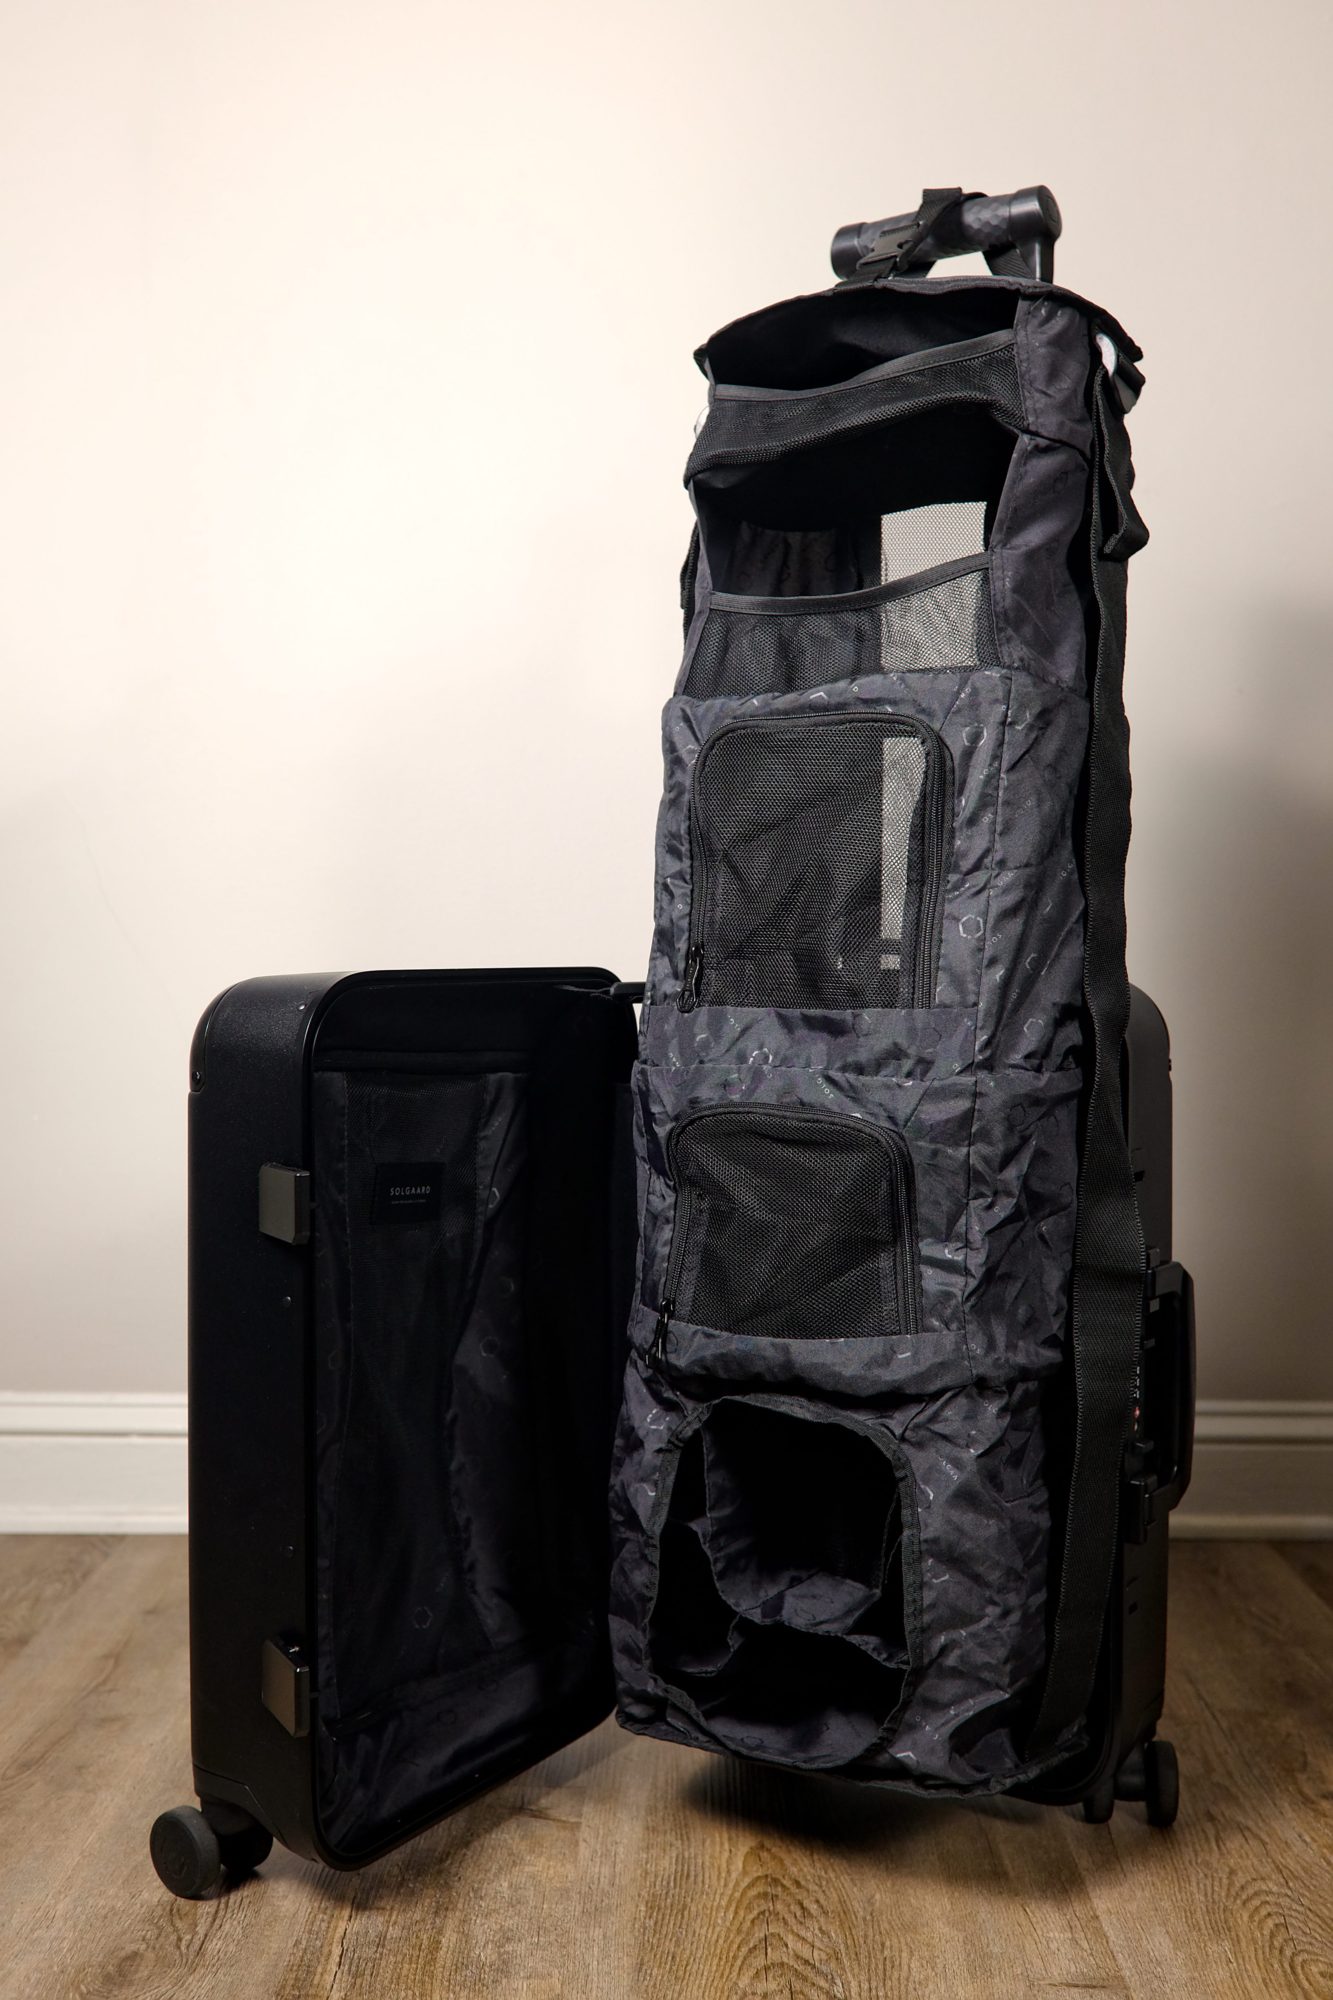 A suitcase with a built-in closet hanging from the handle